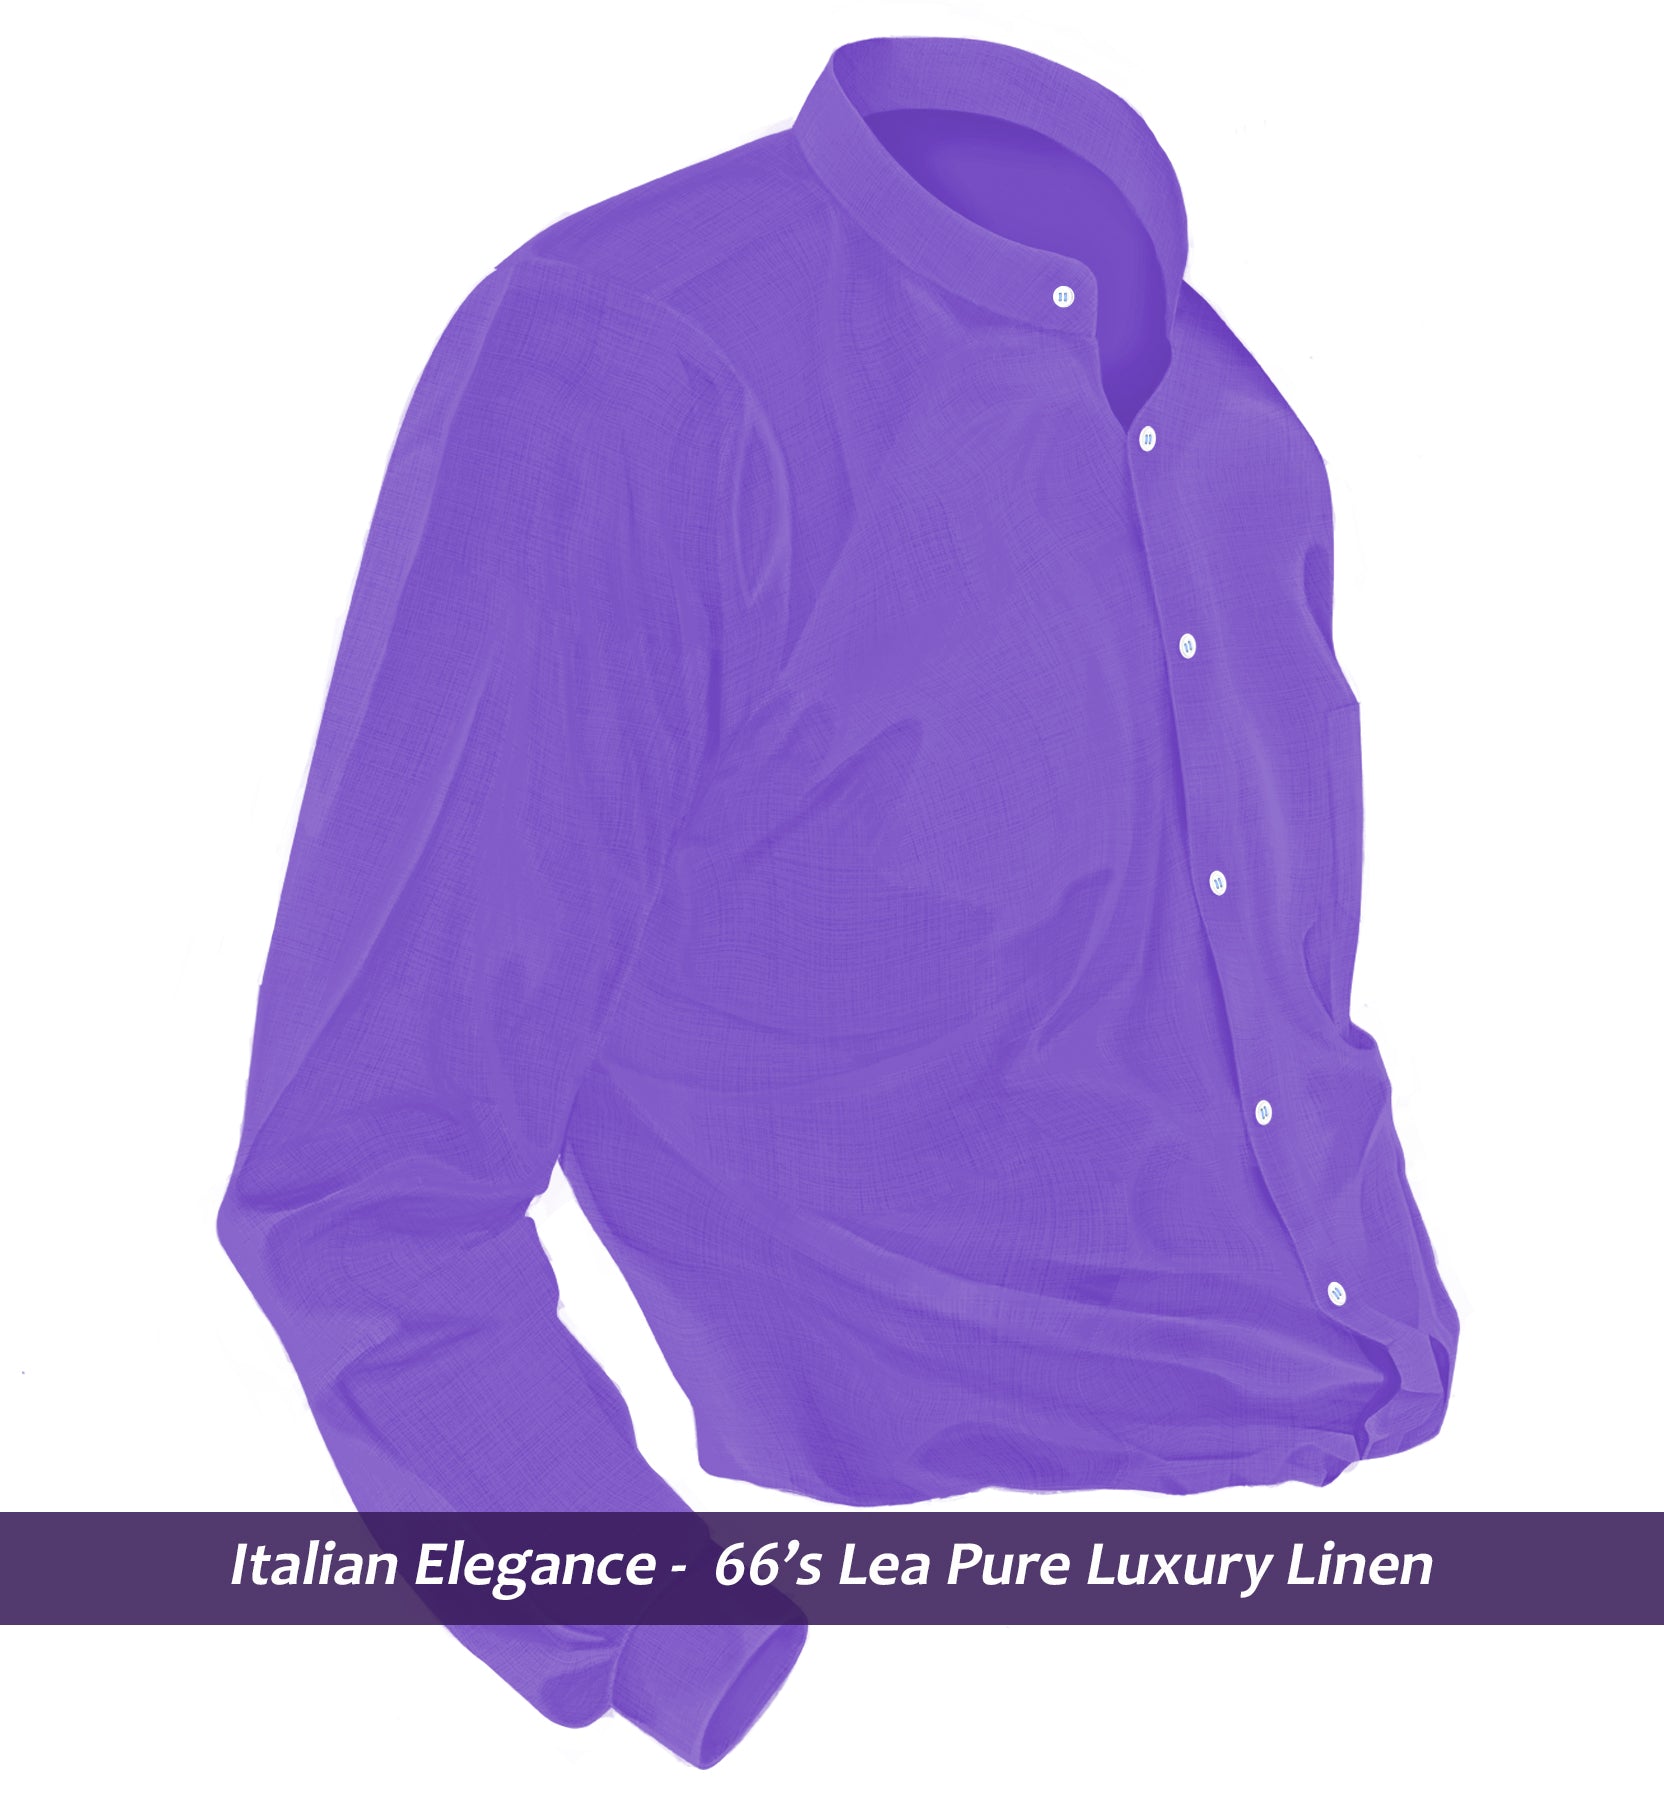 Lagos- Amethyst Solid Linen- Mandarin Collar- 66's Lea Pure Luxury Linen-Delivery from 12th May